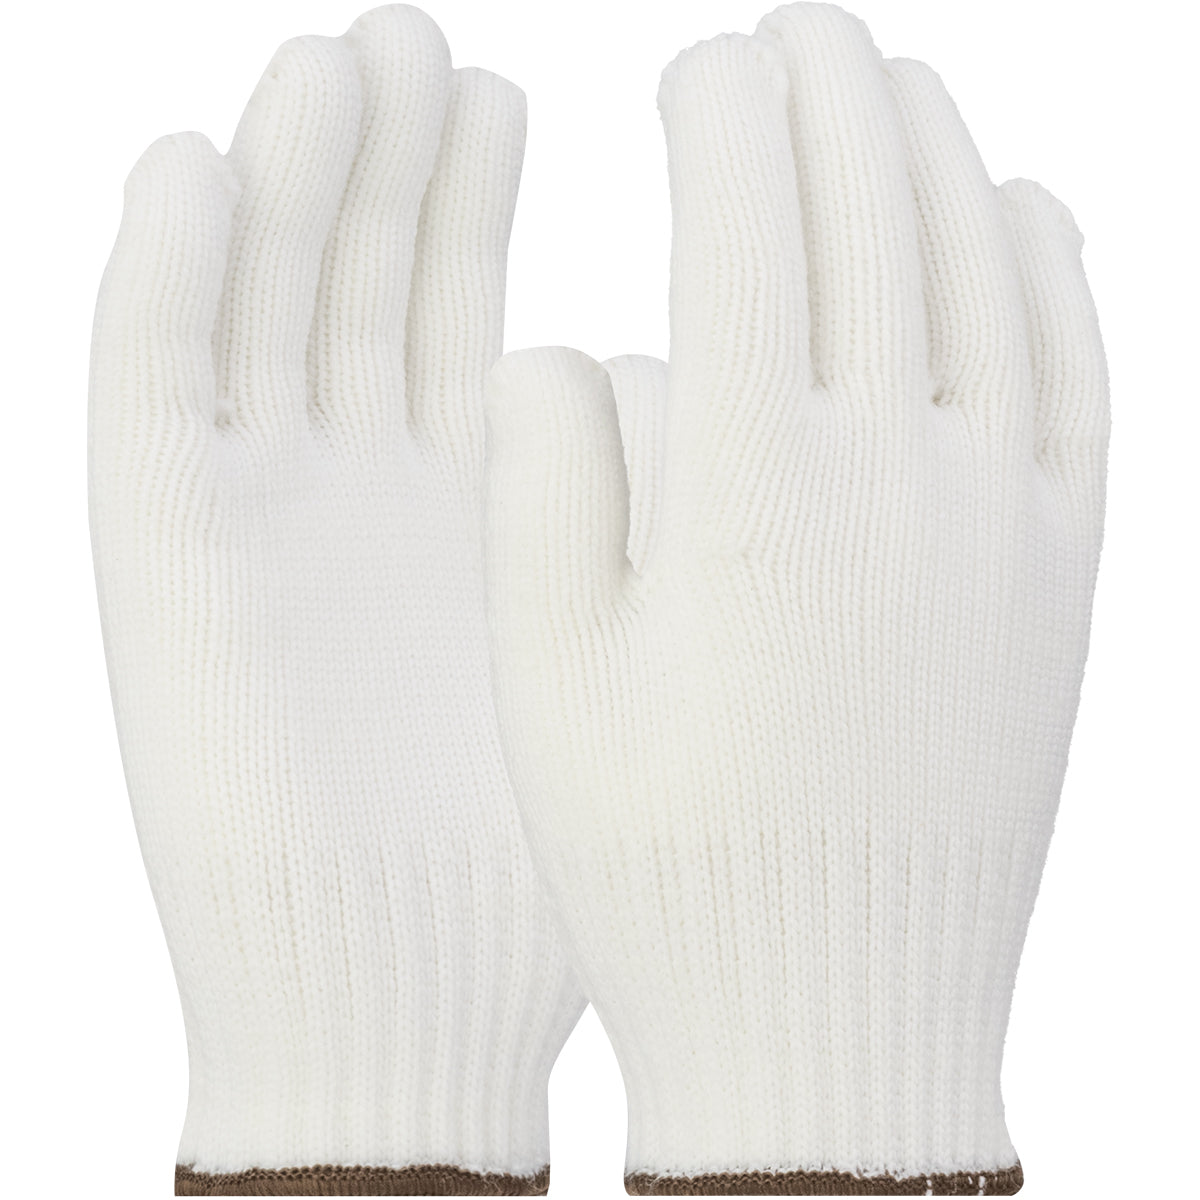 West Chester 713SN Light Weight Seamless Knit Nylon Glove - White